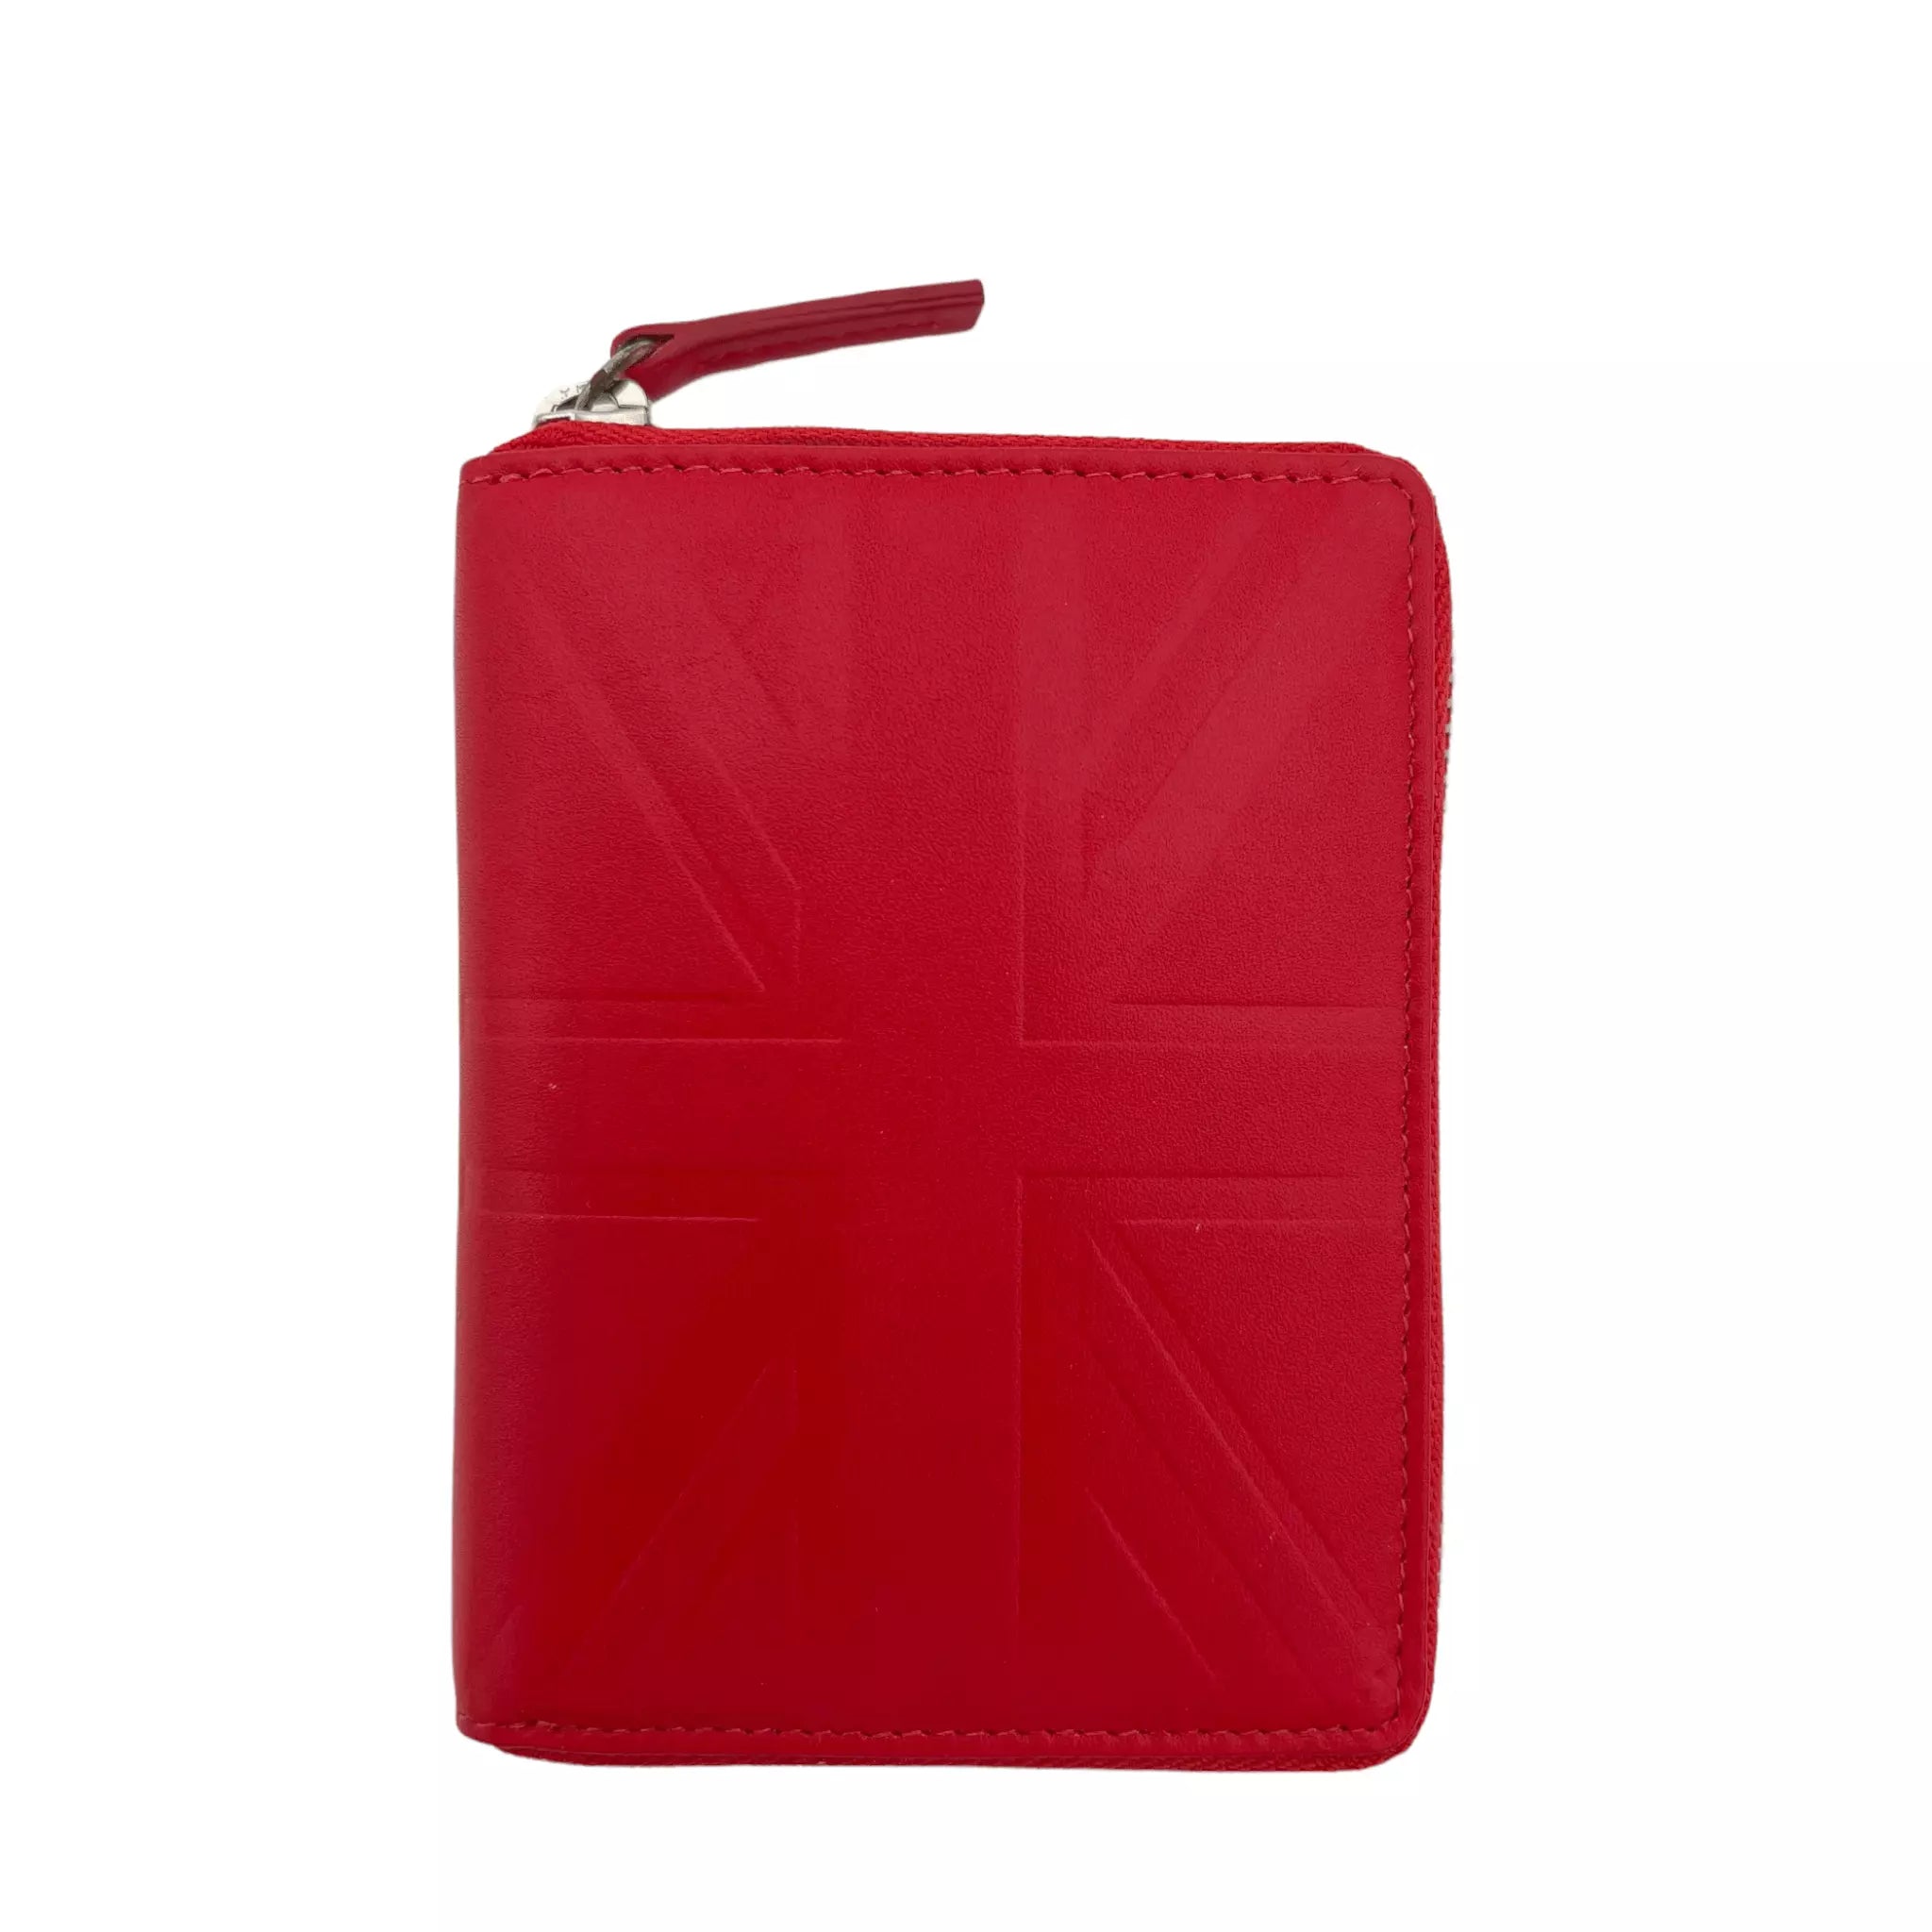 JBPS120 RED PURSE - Purses up to £3.00 - Purses & Wallets